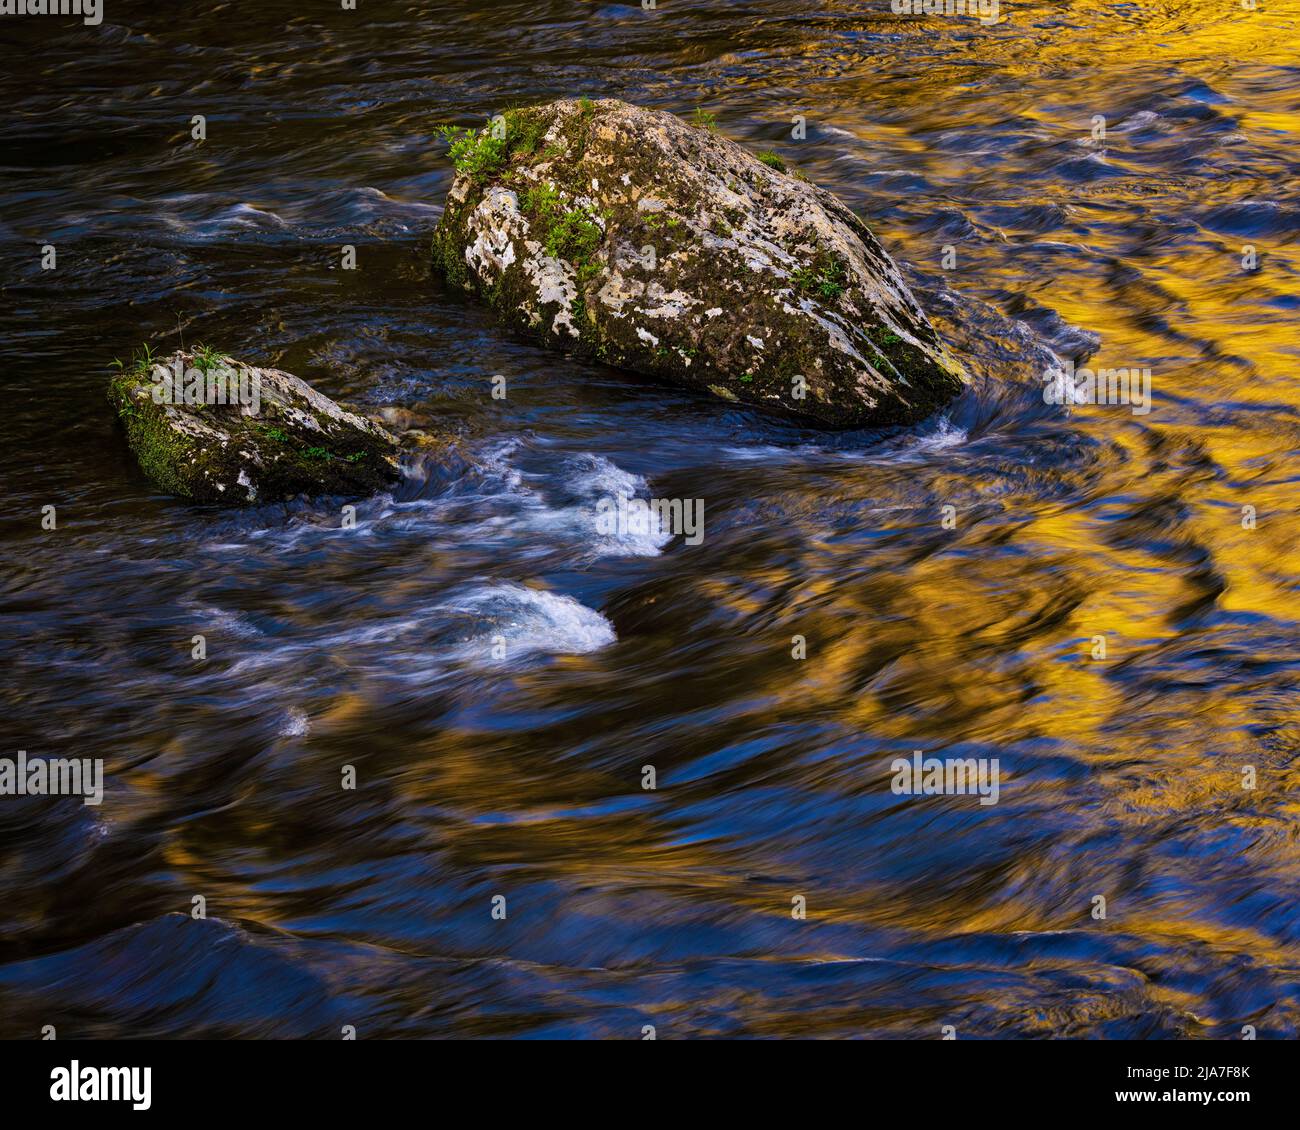 Reflections in the Little Pigeon River in Great Smoky Mountain National Park Stock Photo